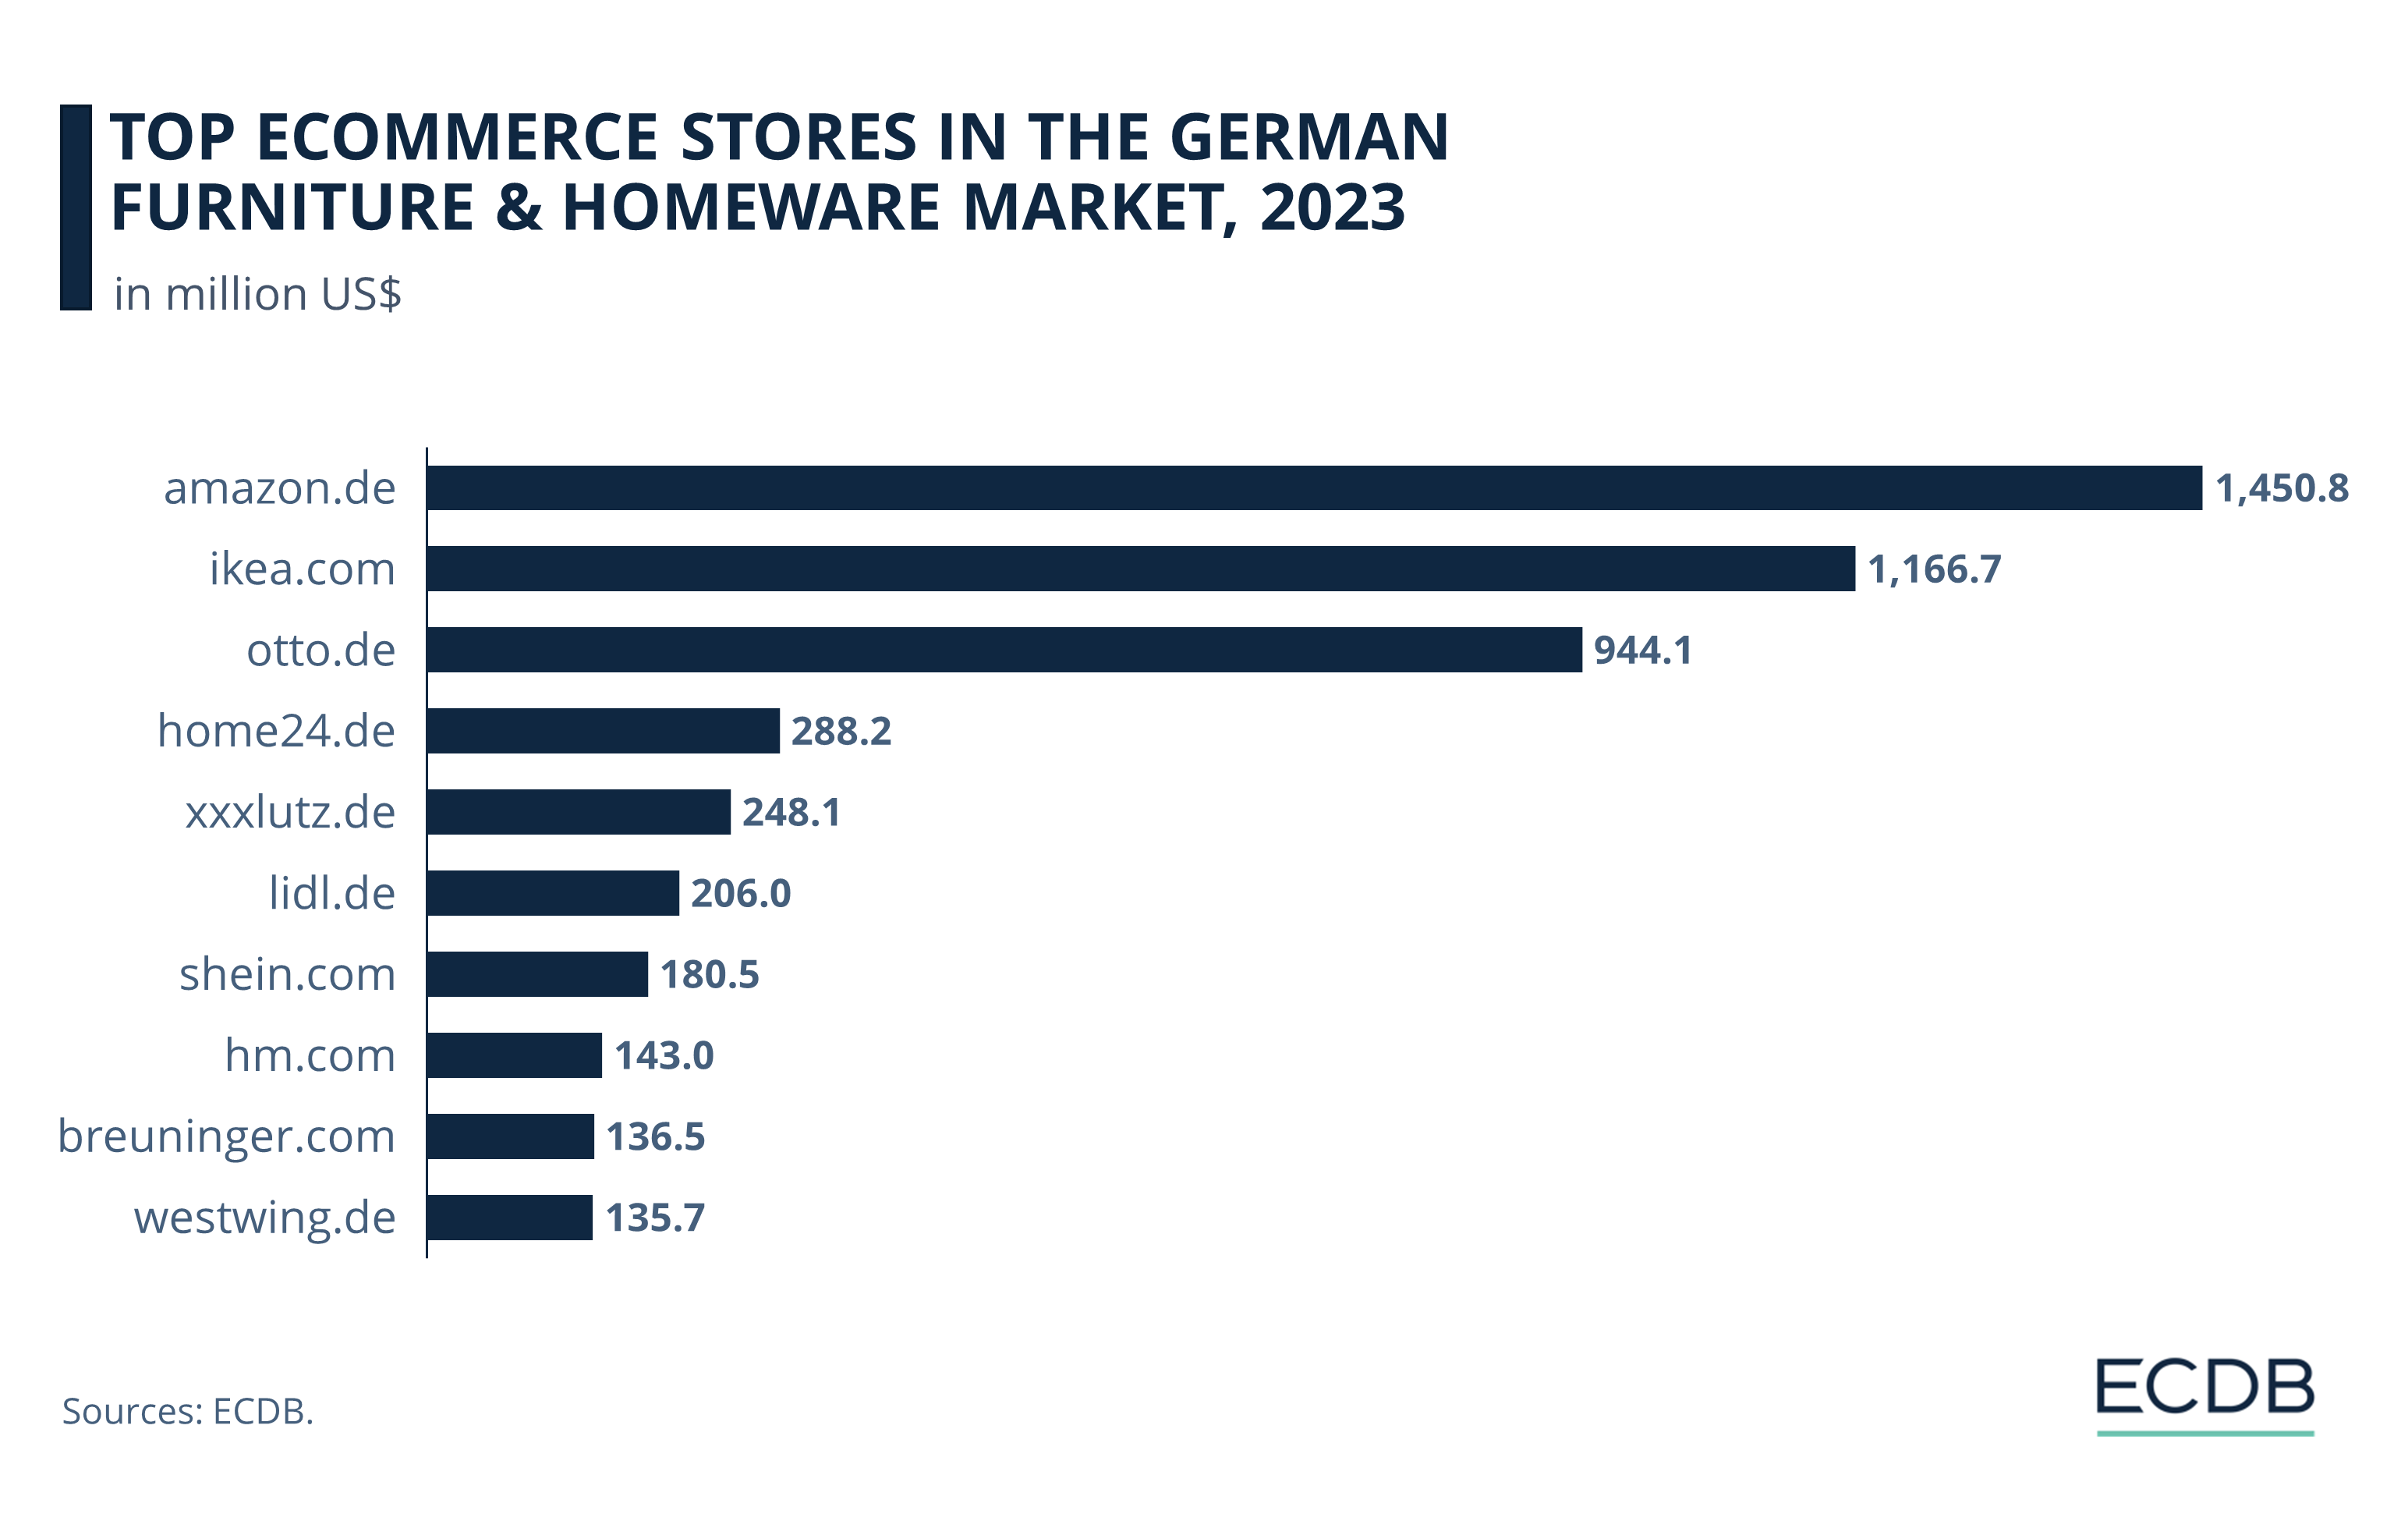 Top eCommerce Stores in the German Furniture & Homeware Market, 2023